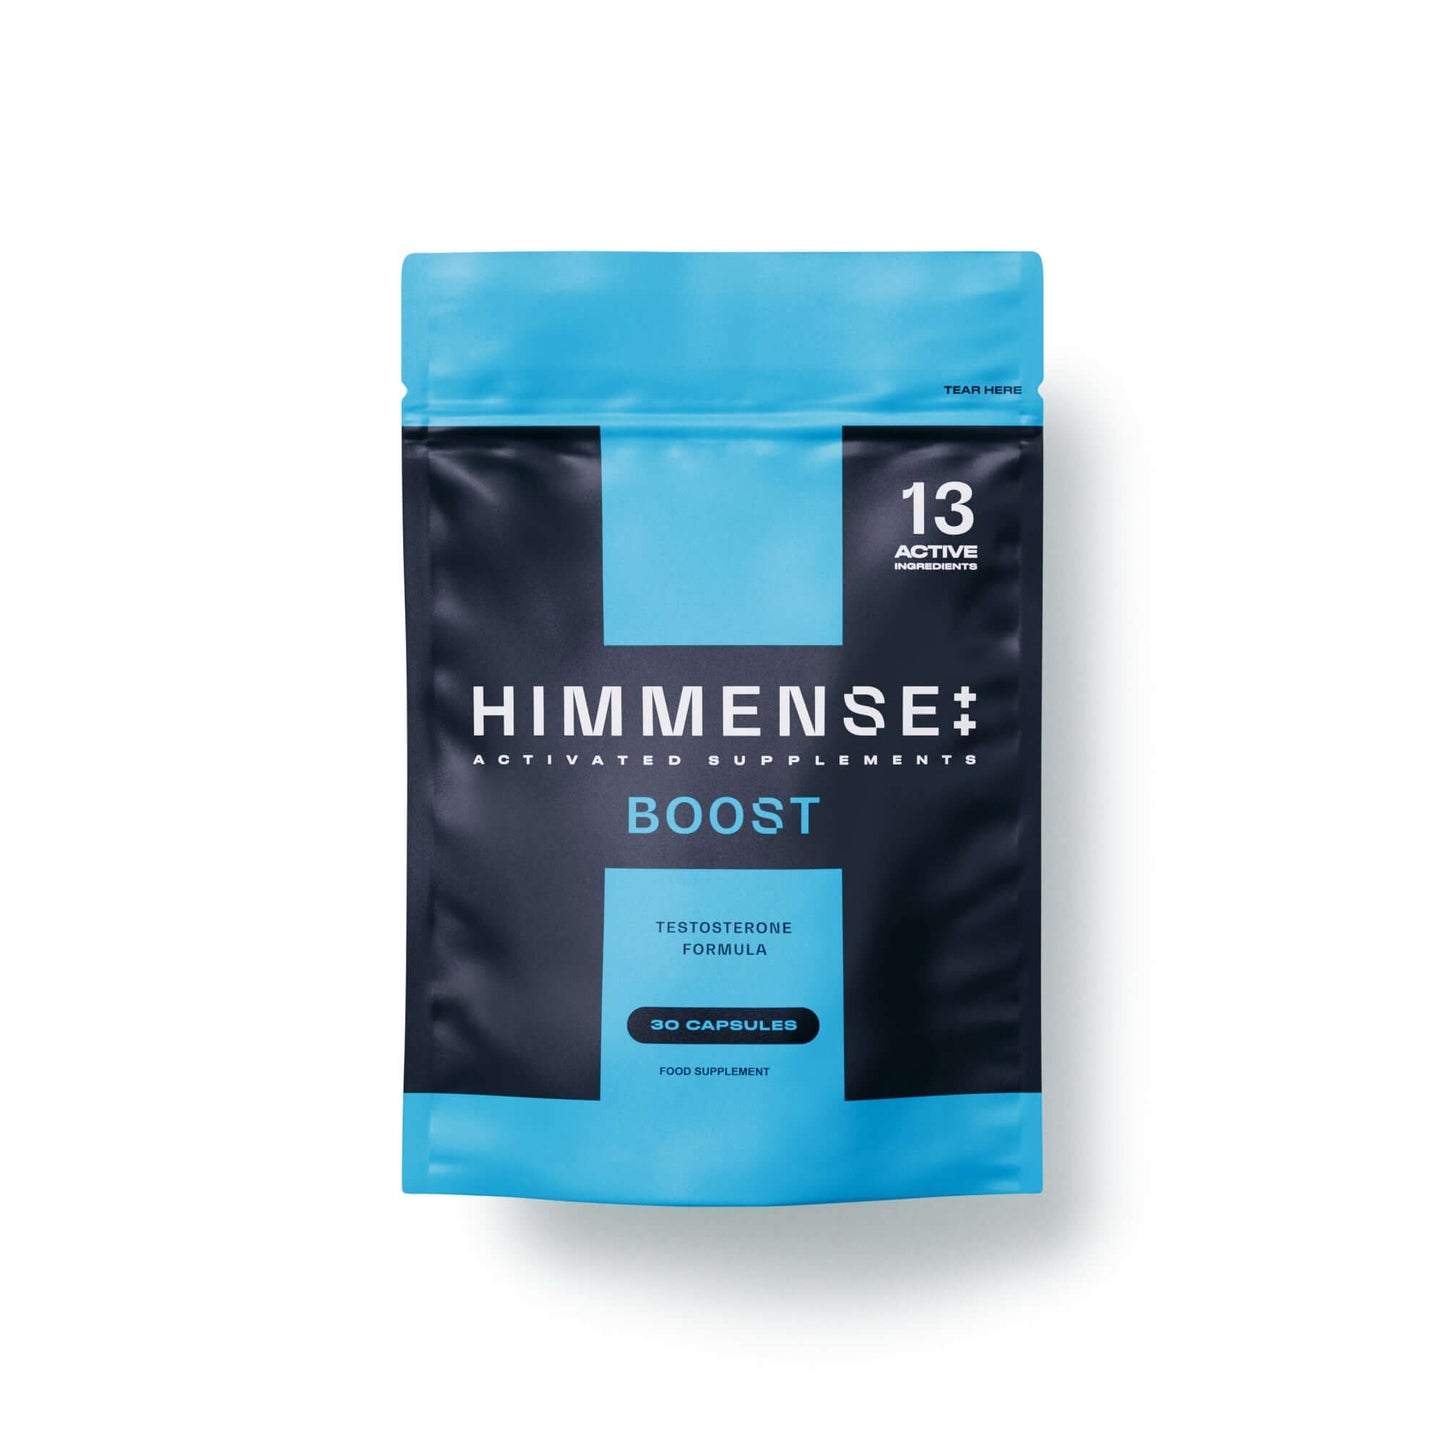 Himmense BOOST testosterone formula supplement for energy, muscle mass, fertility, and mental wellbeing – 30 capsules.